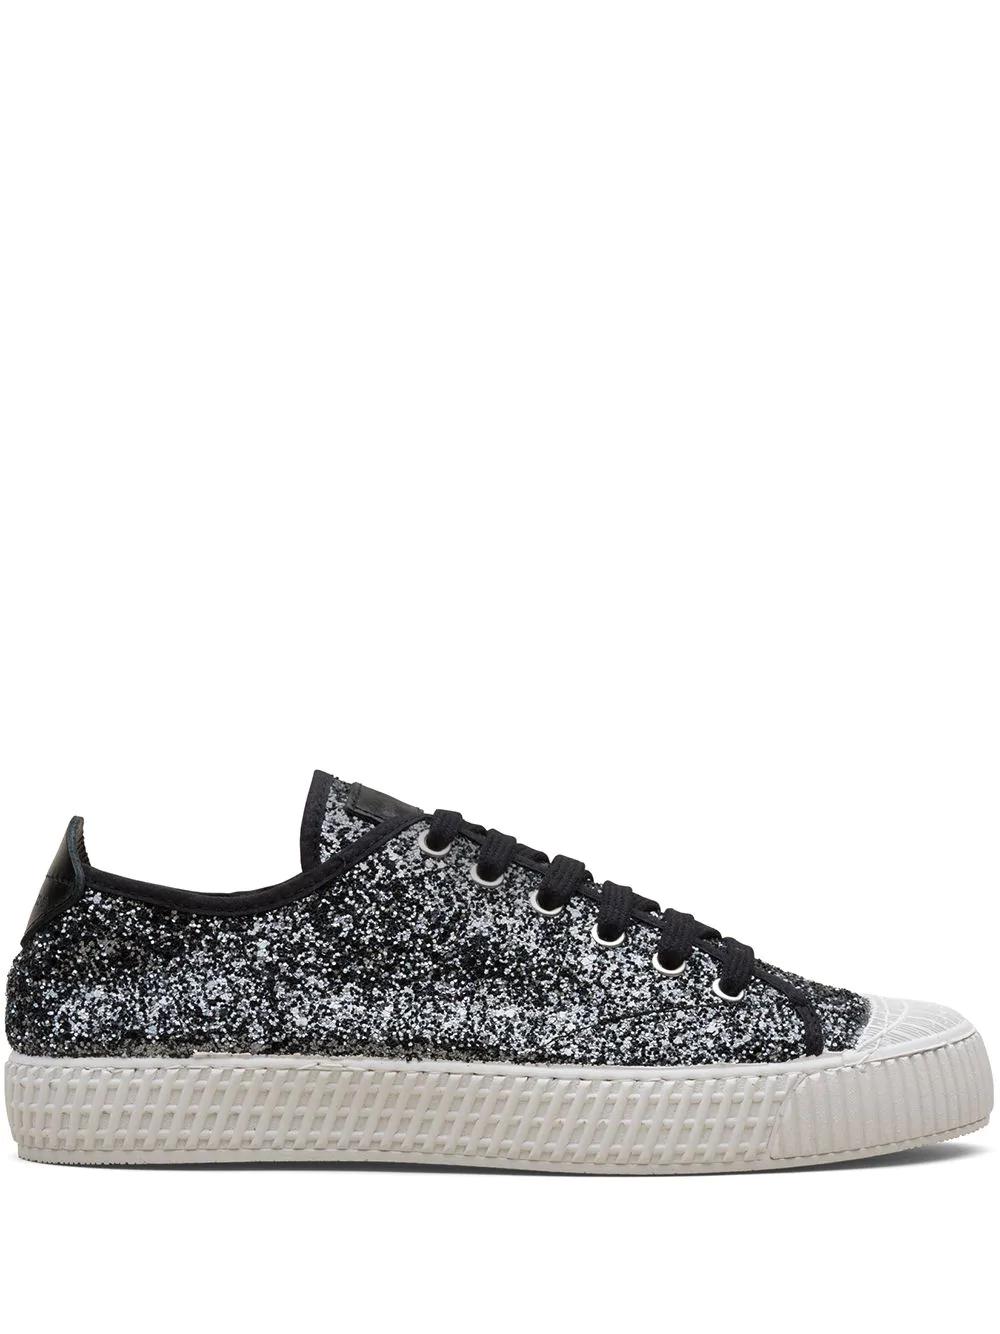 glitter-embellished sneakers by CAR SHOE